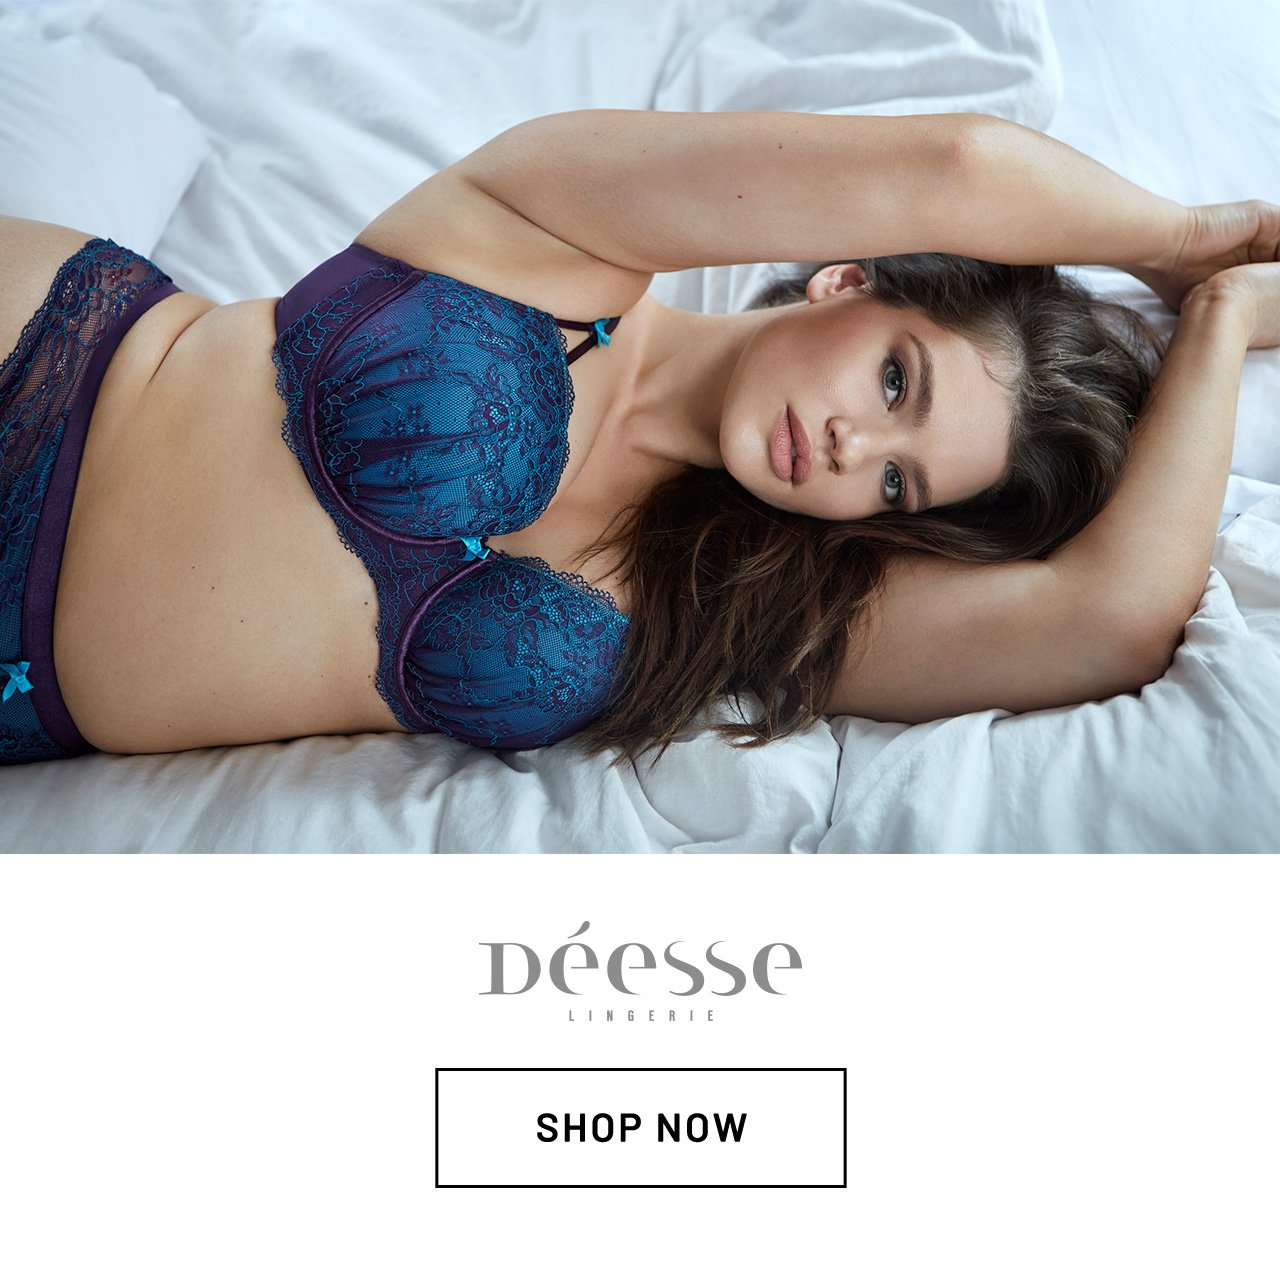 Addition Elle: Feel like a goddess with new lingerie from Déesse